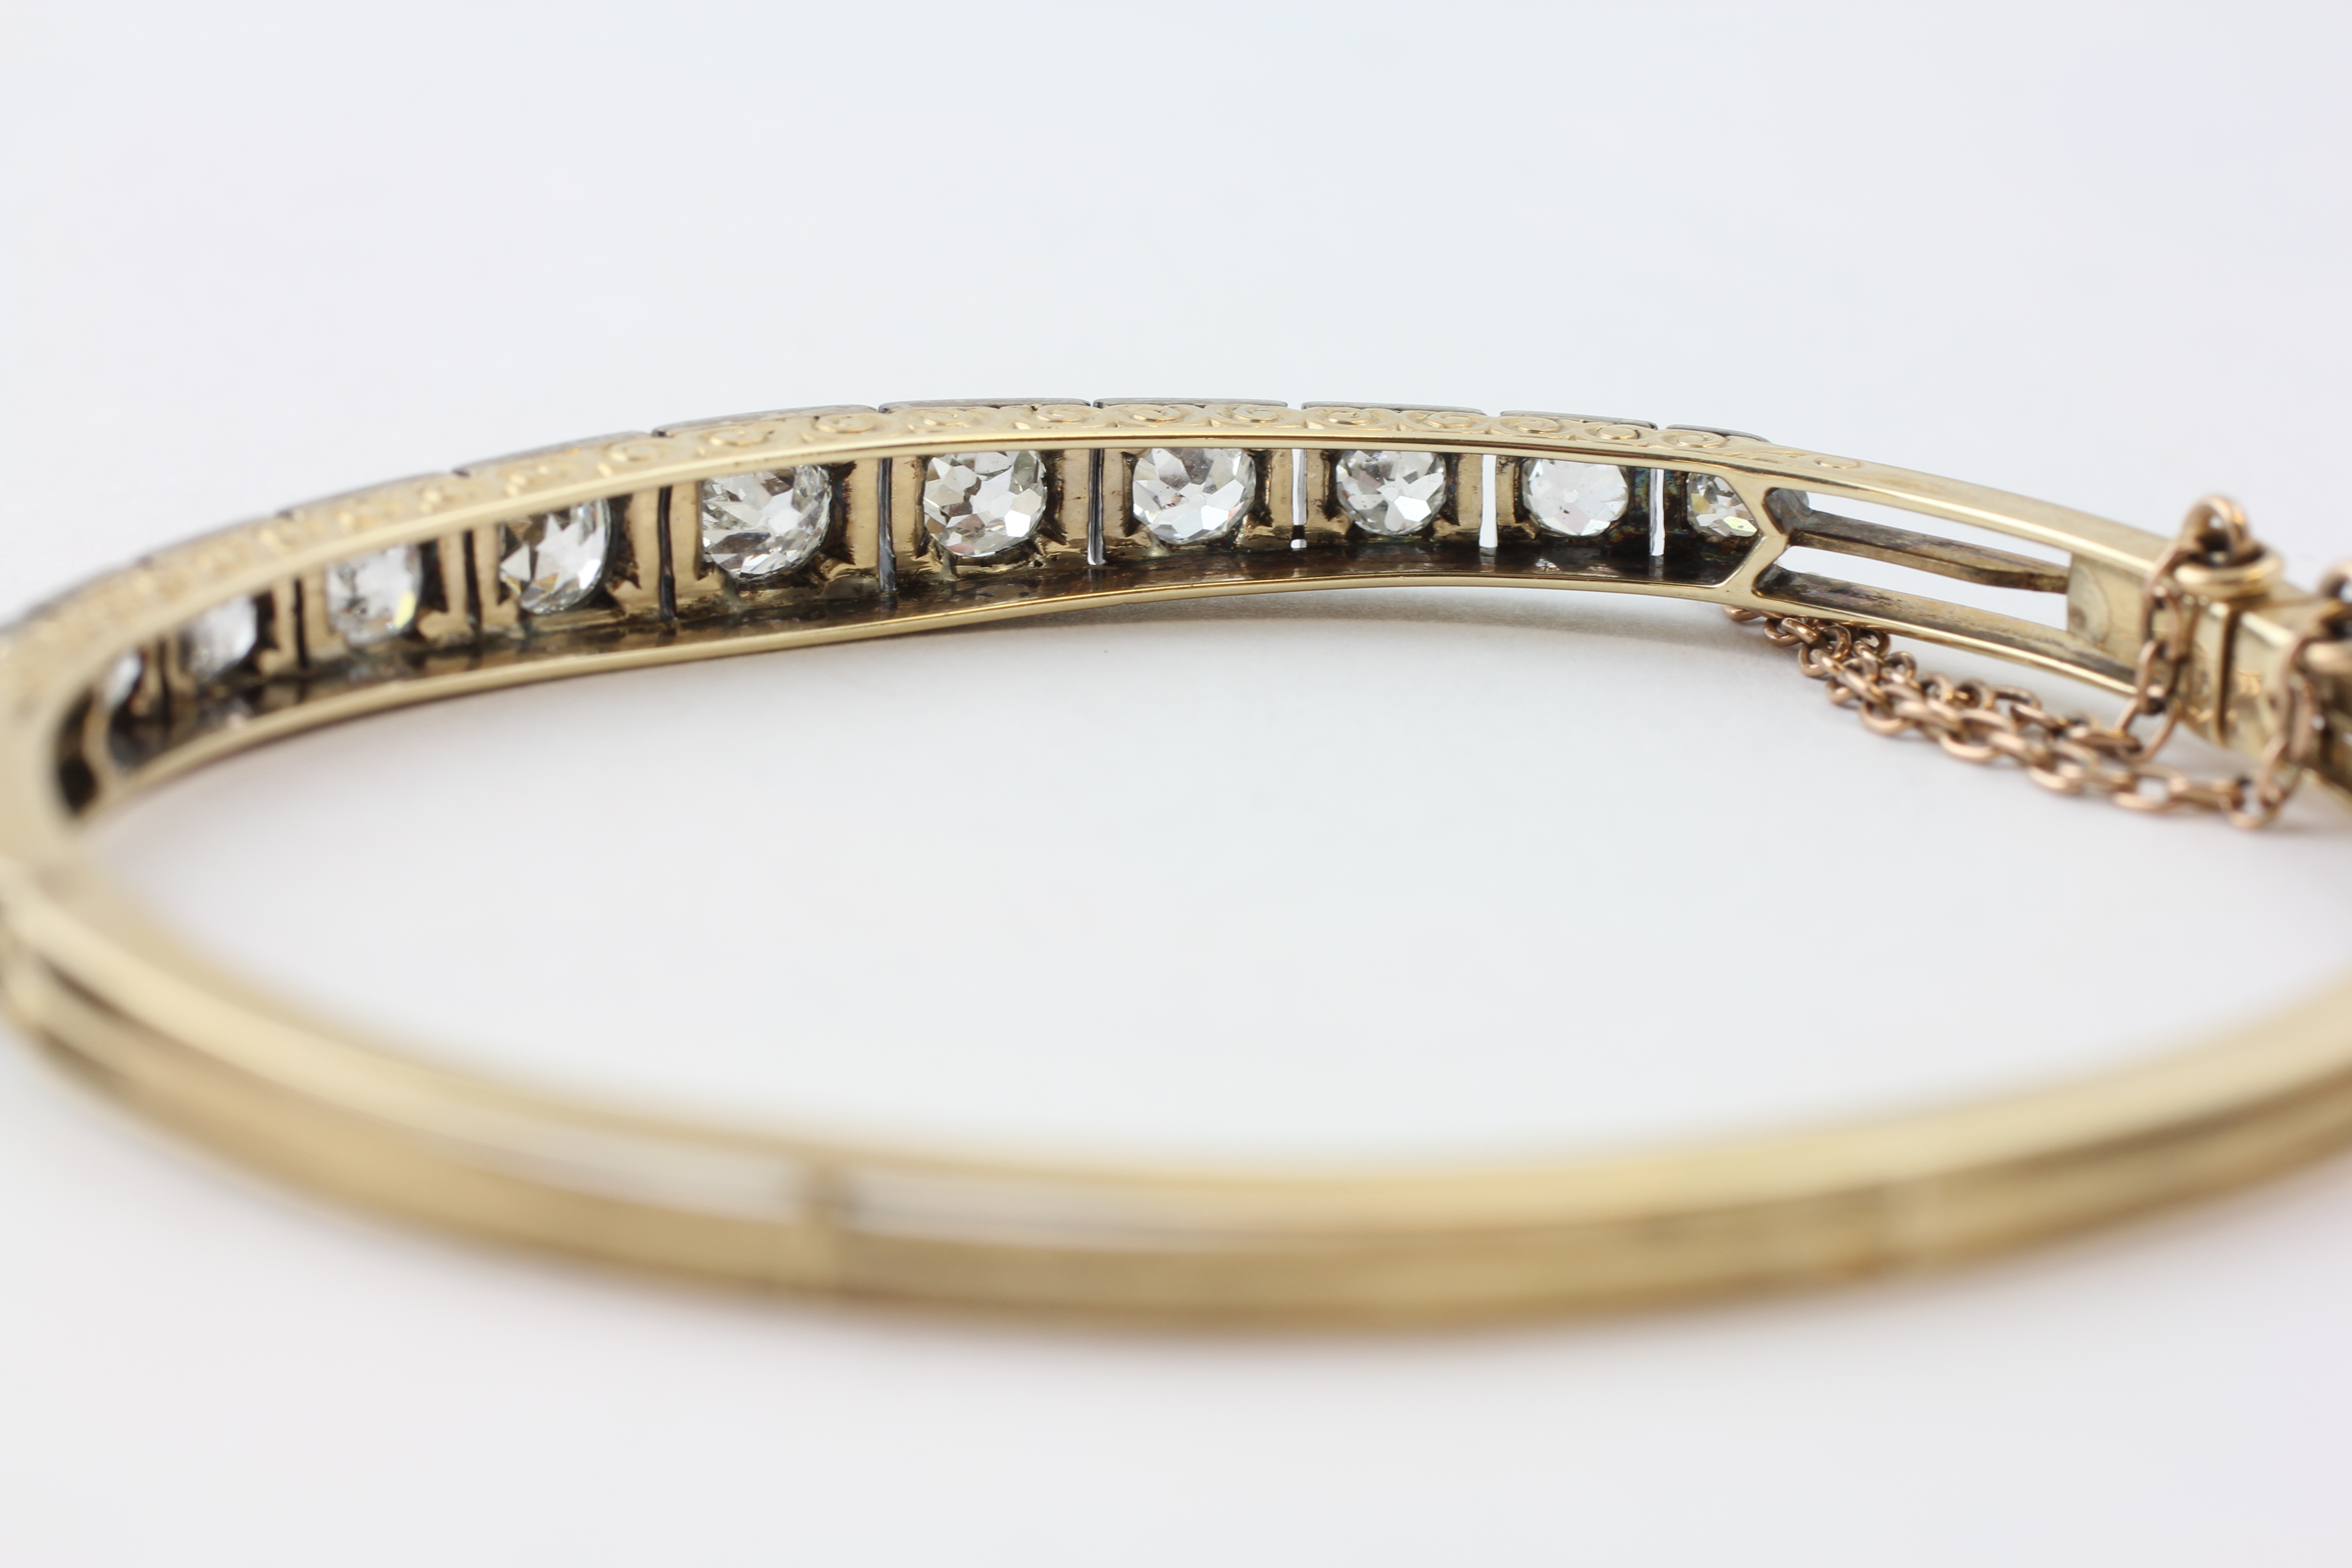 AN ELEVEN STONE DIAMOND HINGED BANGLE WITH SAFETY CHAIN, - Image 7 of 7